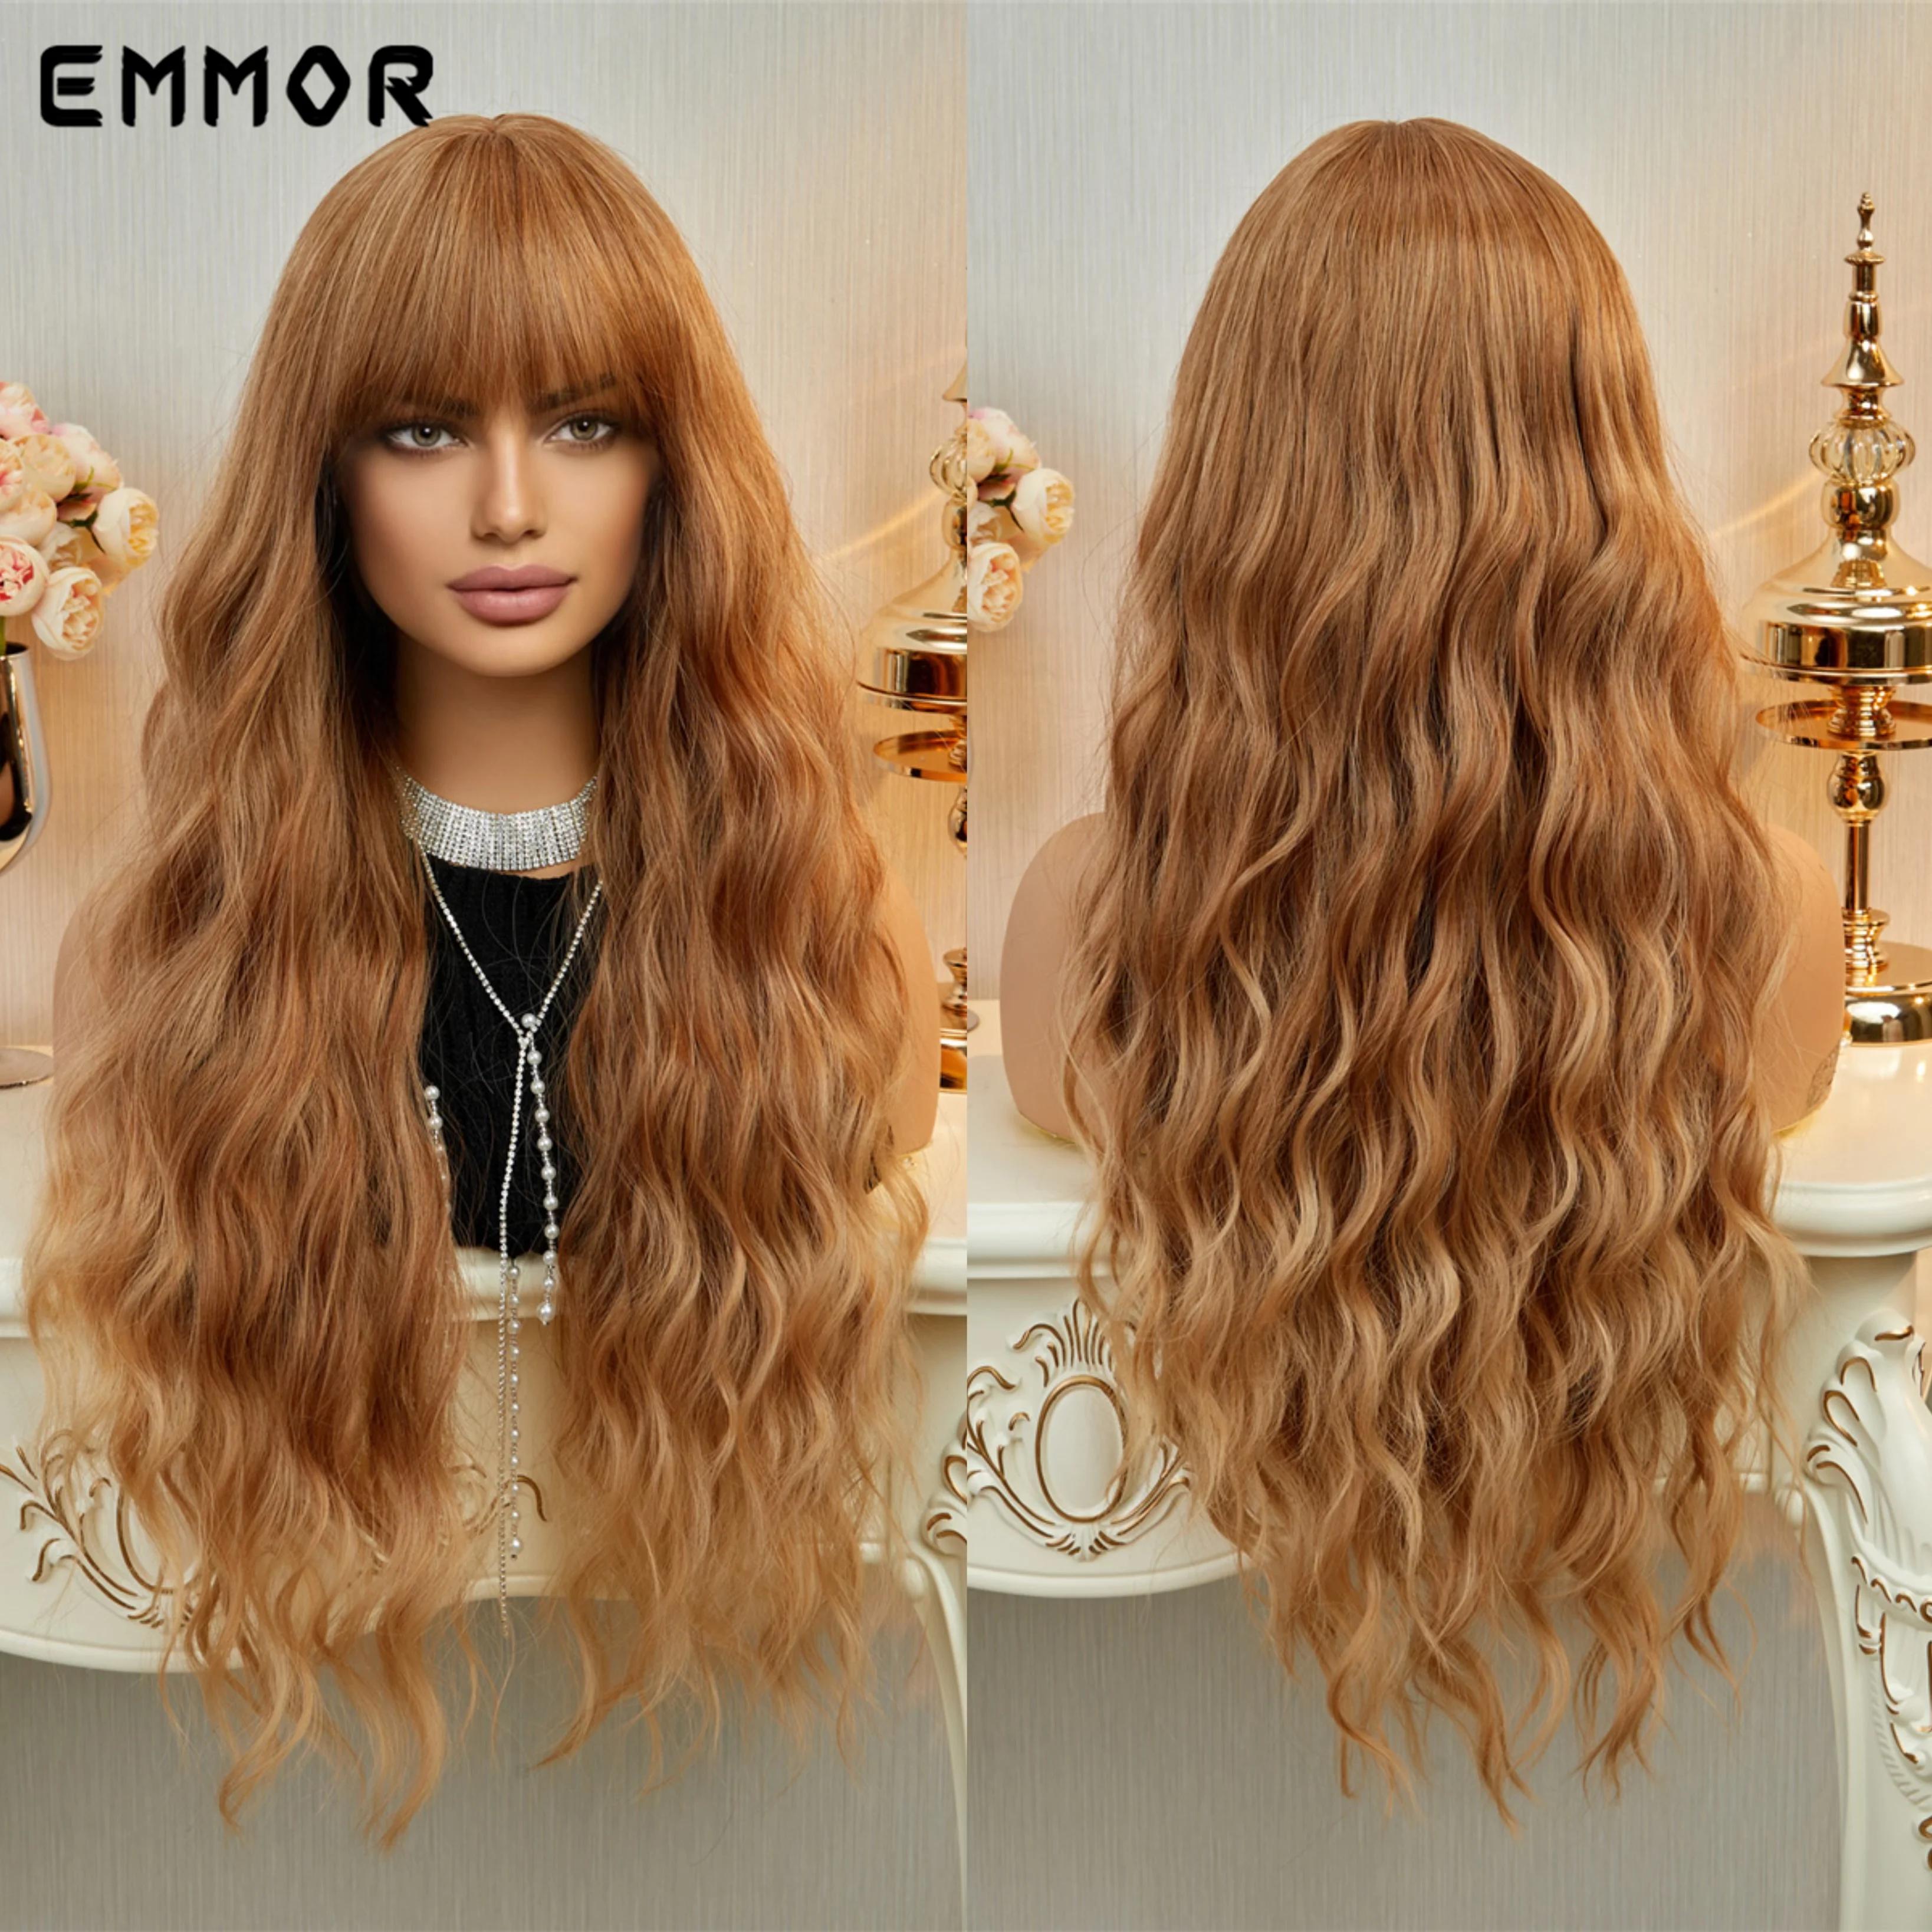 Emmor Synthetic Long Wavy Wigs Բ Bangs  Women Cosplay Natural Ombre Black to Ʈ  Hair Wig High Temperature Fib